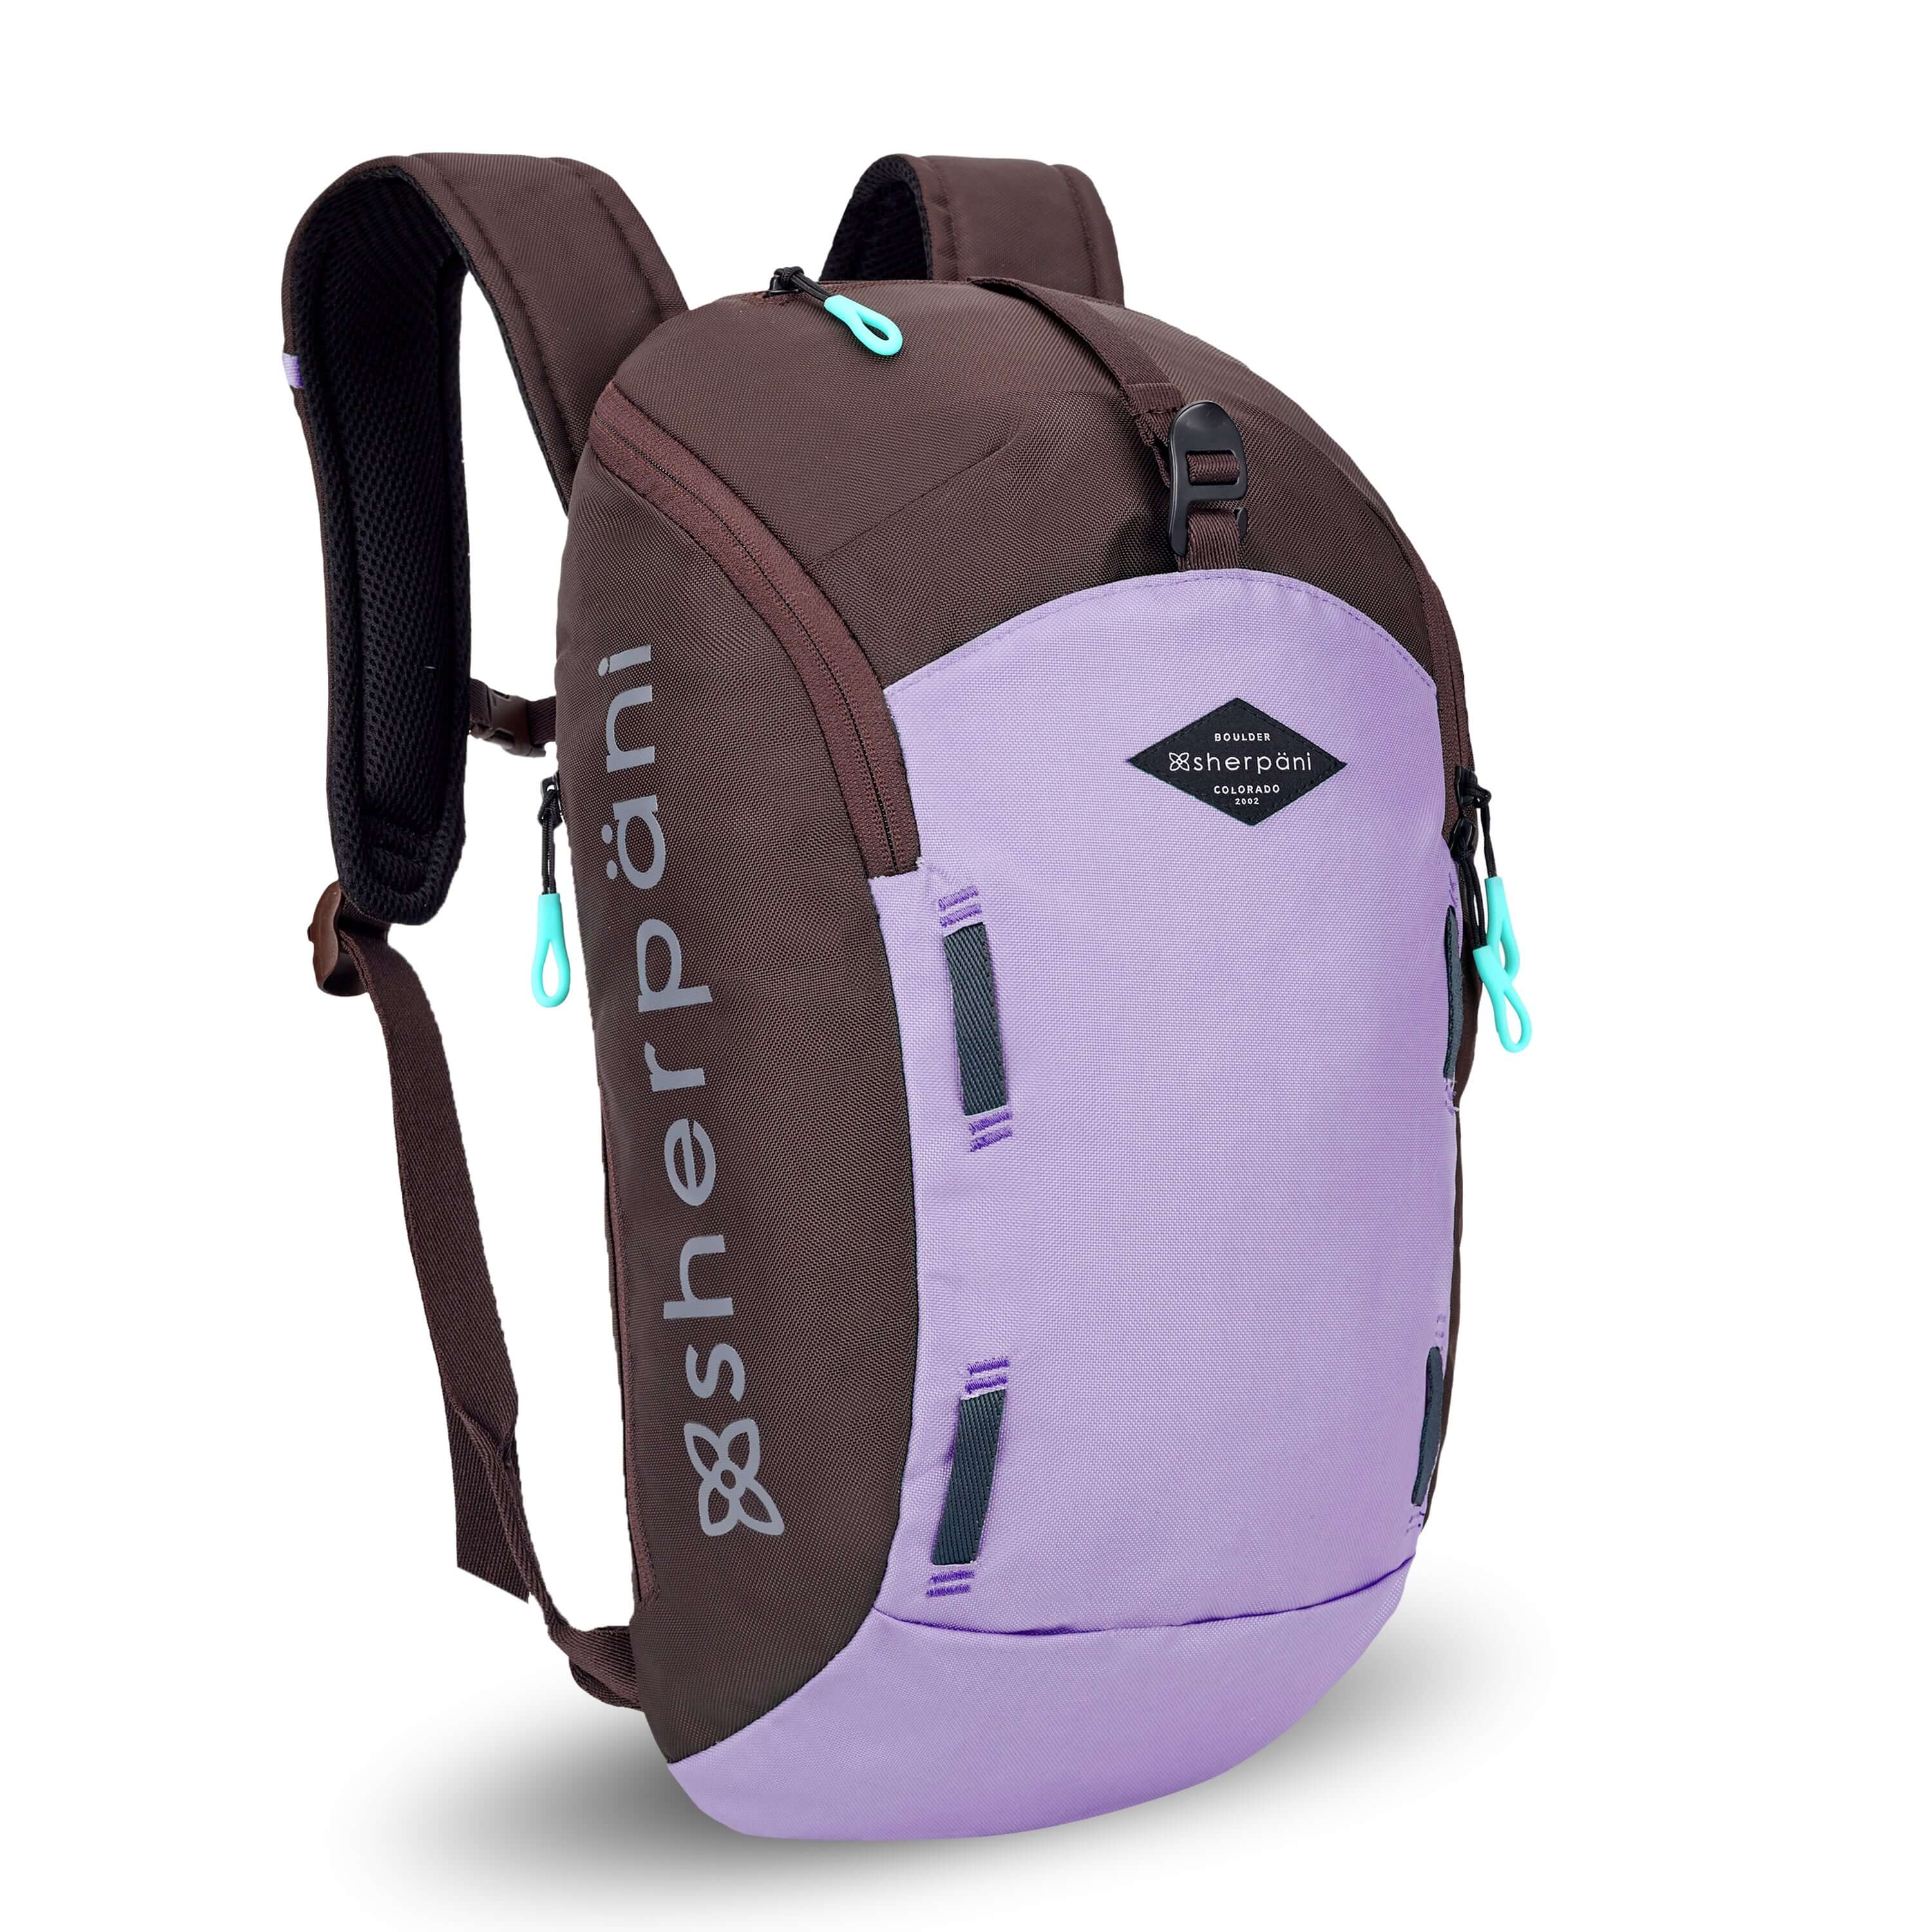 Angled front view of Sherpani backpack, the Switch in Lavender. The bag is two-toned in lavender and brown. Easy-pull zippers are accented in aqua. At the top is a metal buckle that connect to an external pouch on the front panel. It has adjustable and padded backpack straps. There is a daisy chain feature on the front panel.